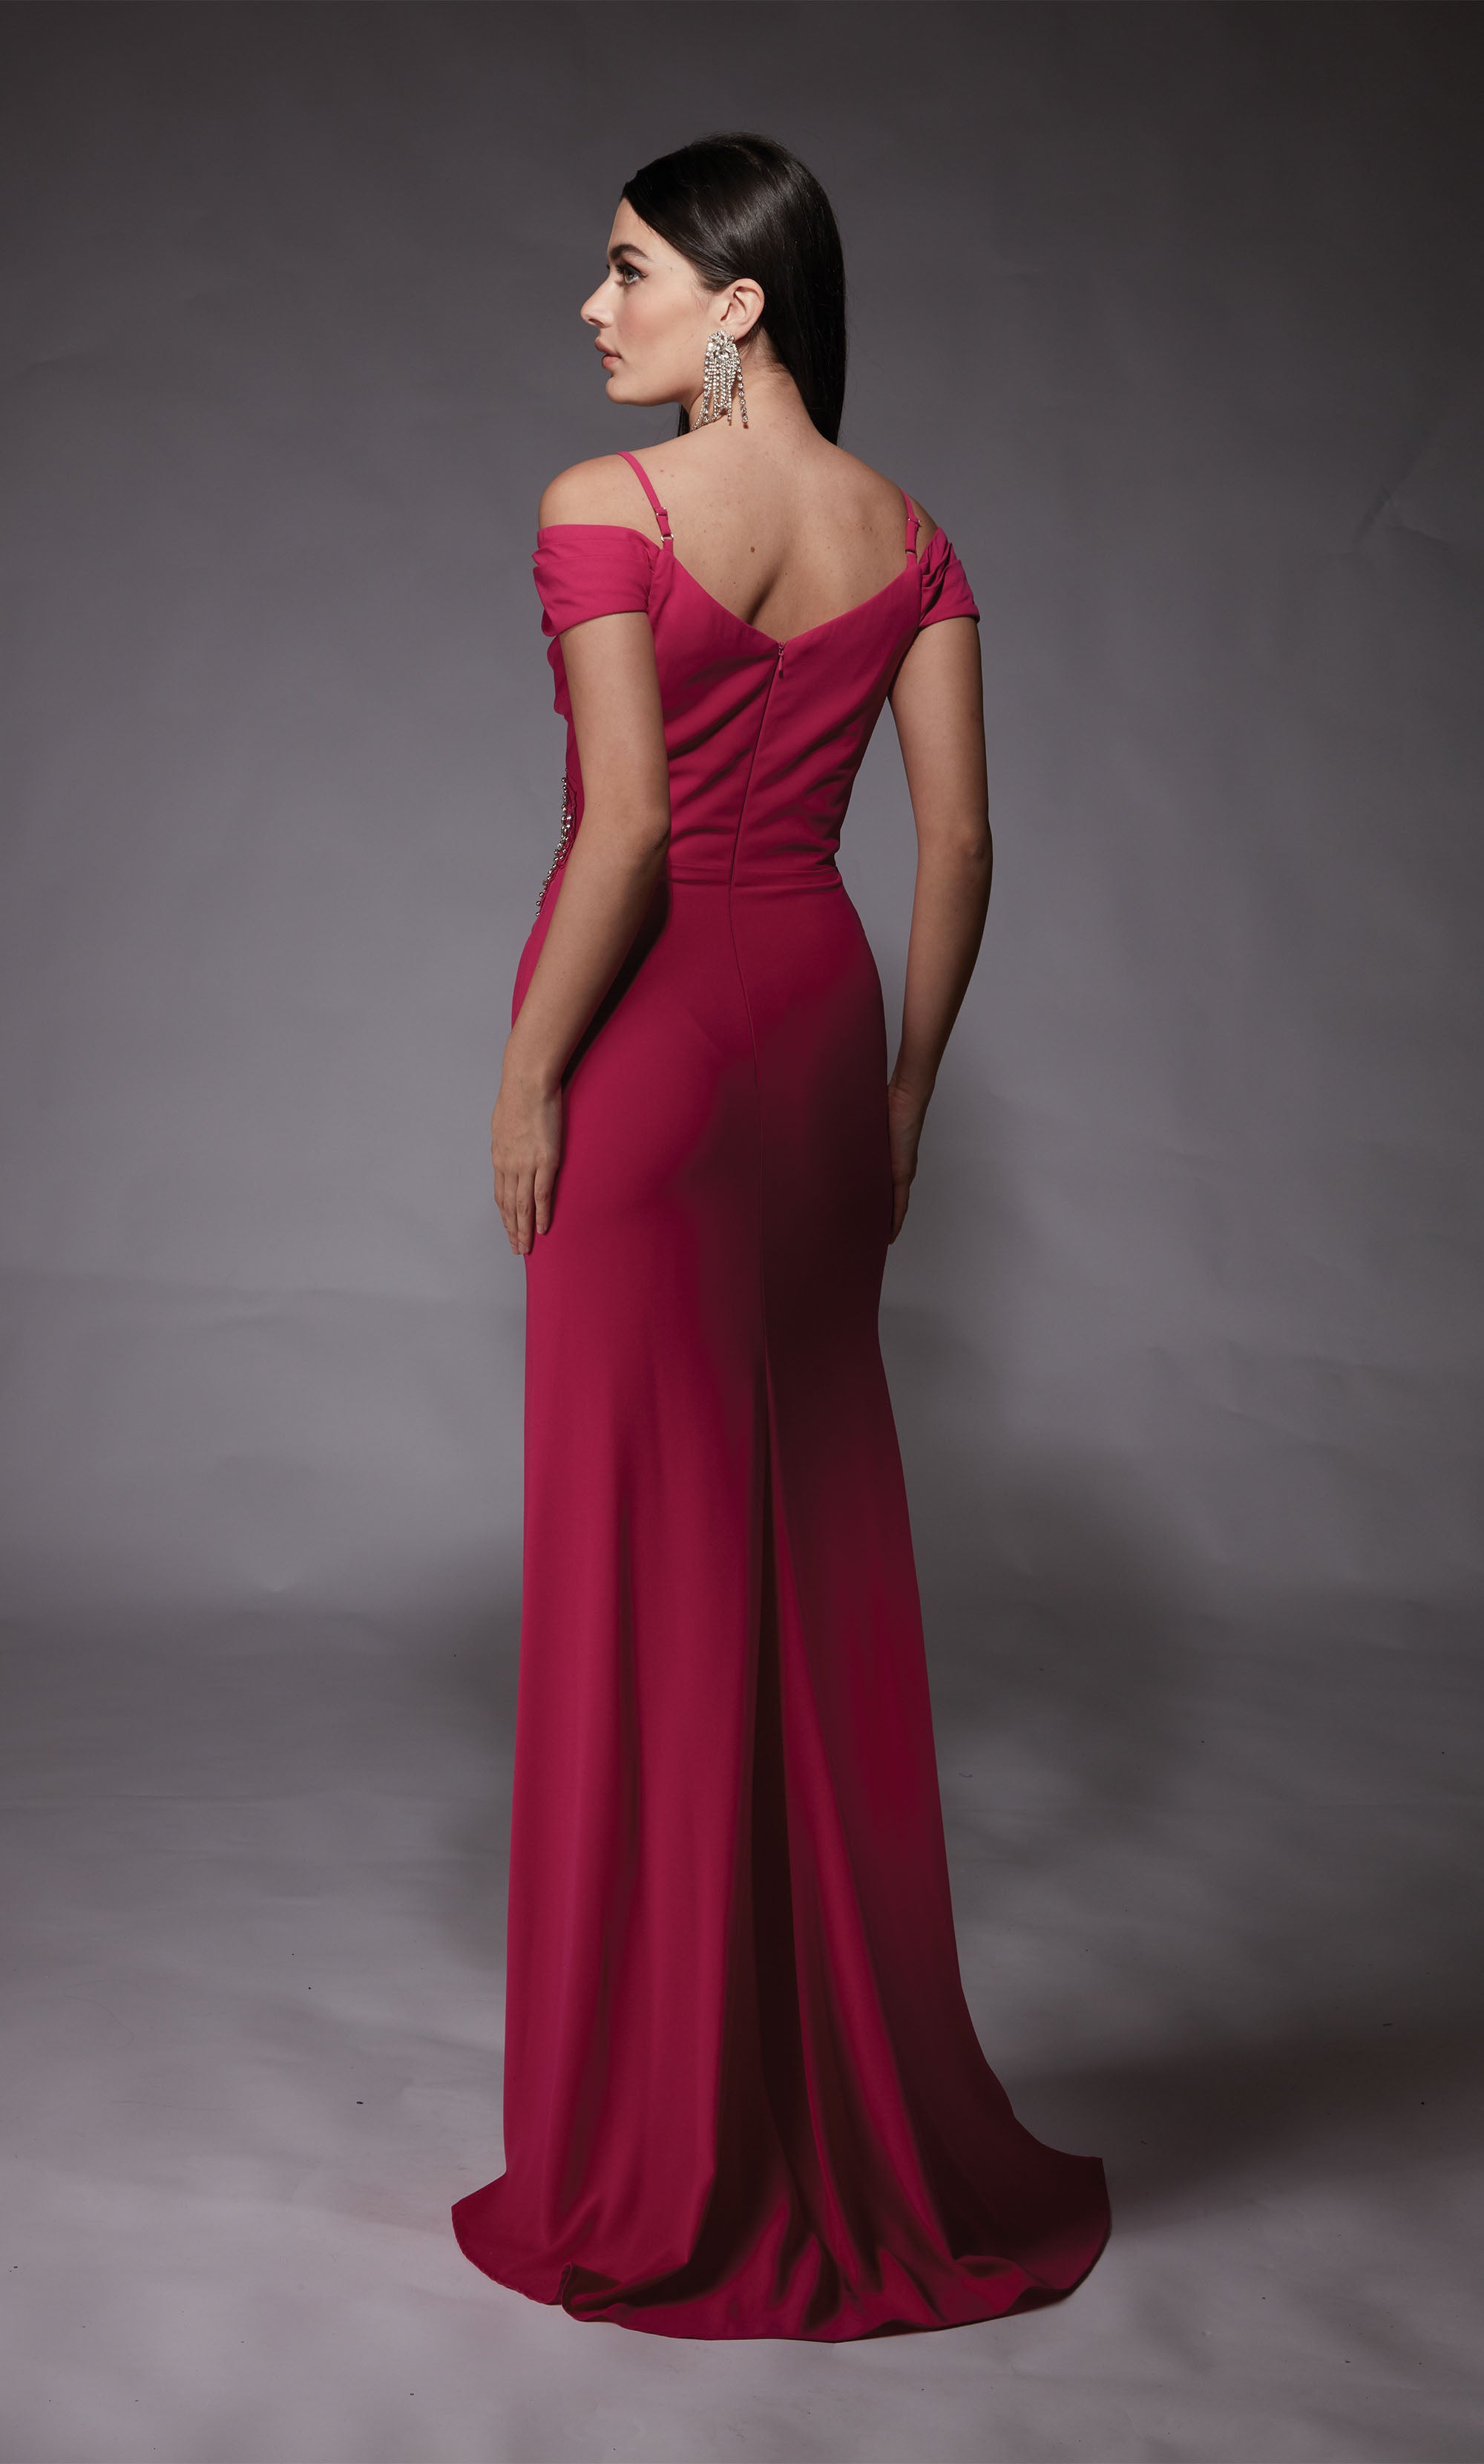 A hot pink, off-the-shoulder, mother-of-the-bride dress with adjustable spaghetti straps and a side slit. The back has a zip-up closure and a slight train.